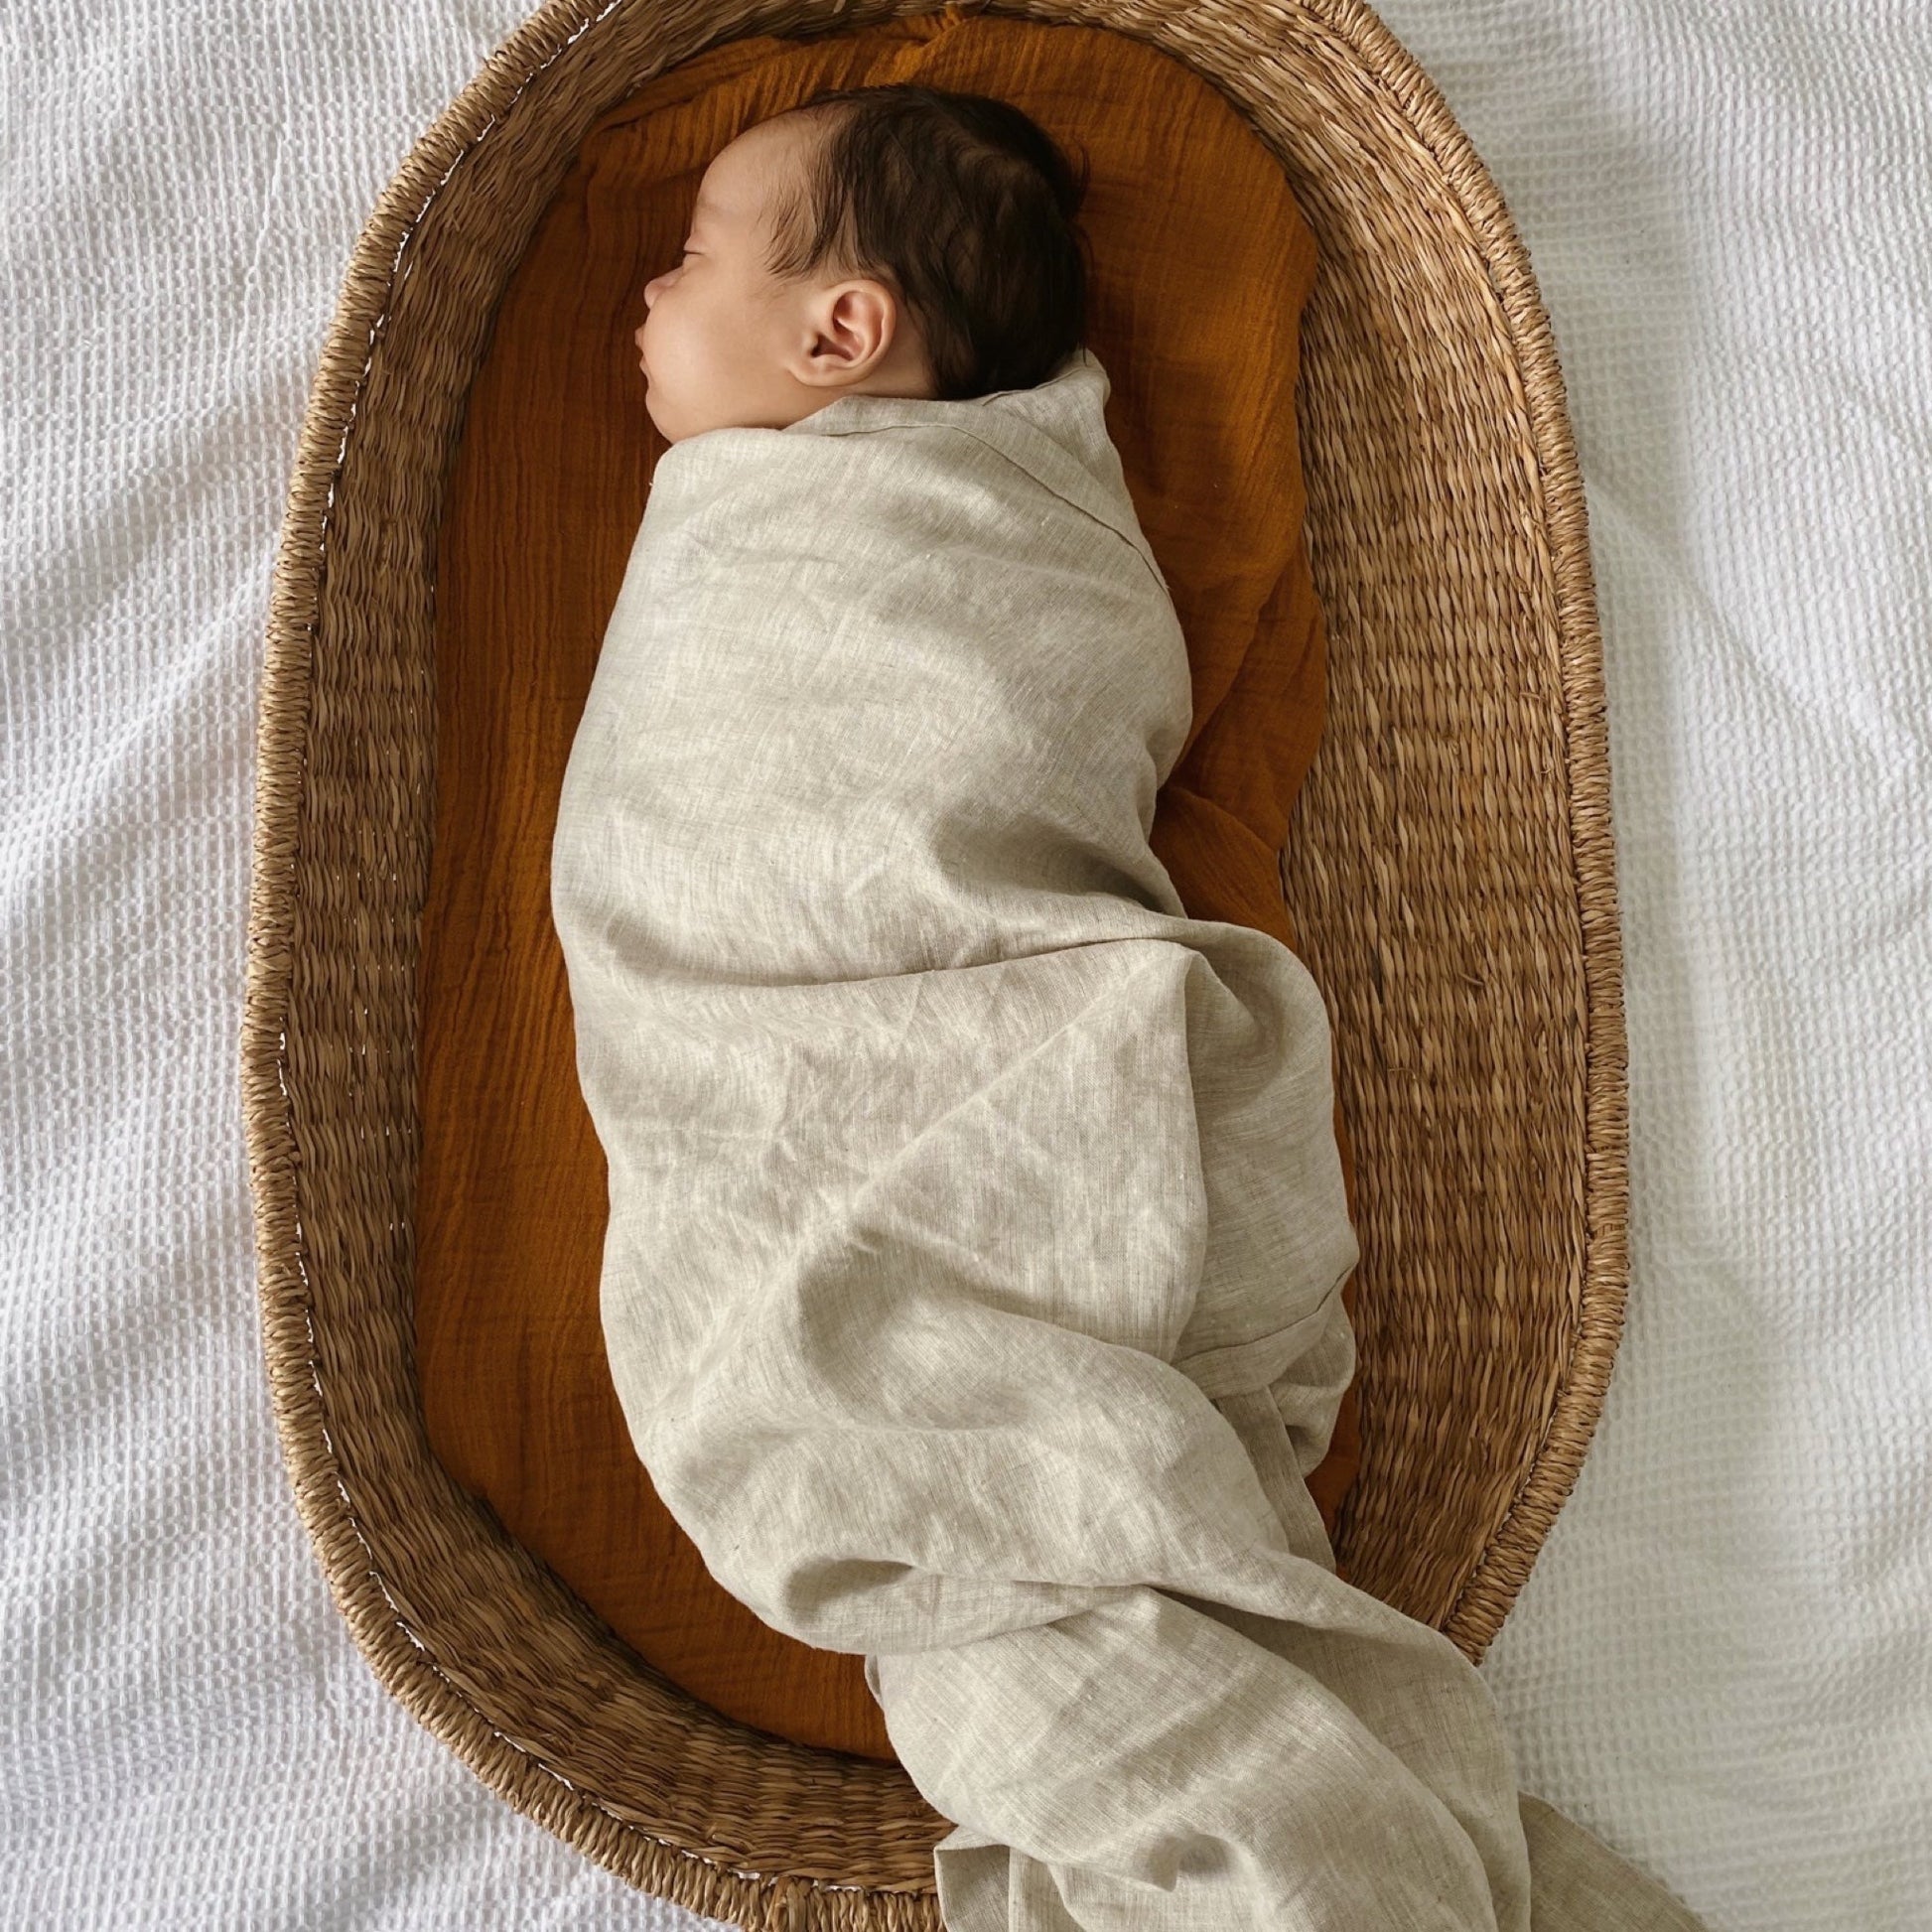 gorgeous baby in natural hemp swaddle